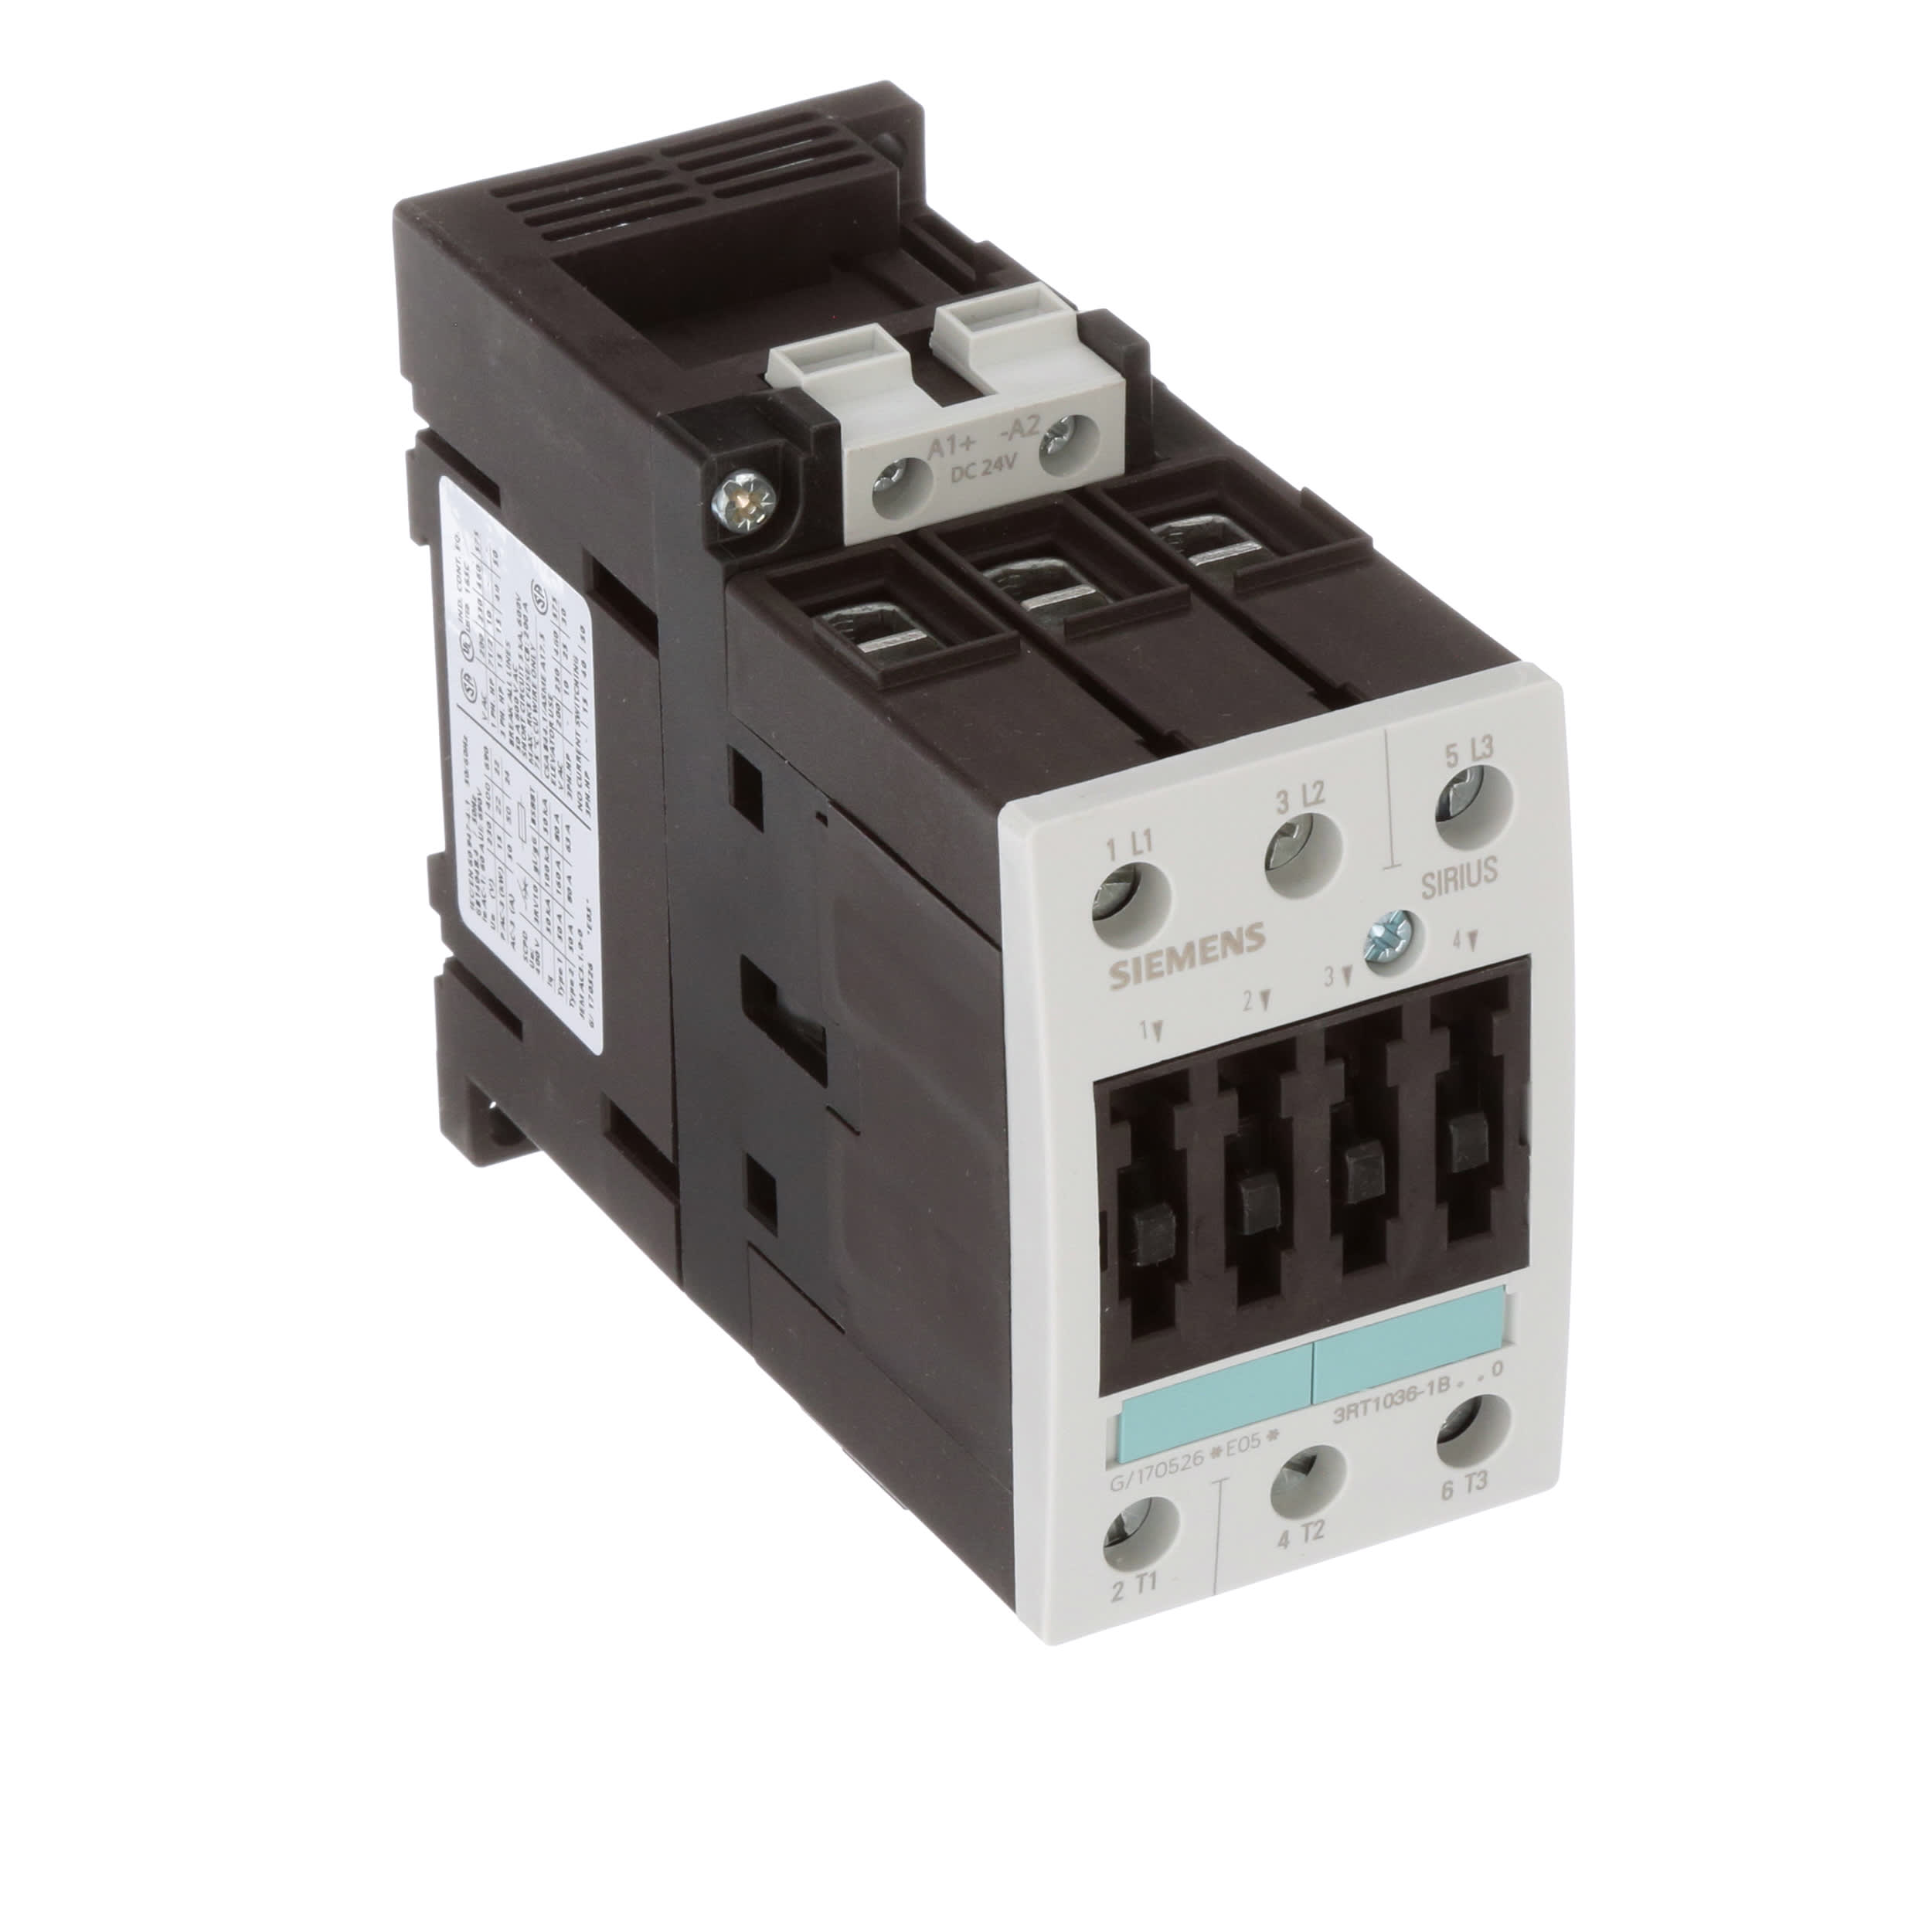 3RT1036-1AK61 AC Contacteur 120V Directly replace for Siemens 3RT1036 Contacteur 